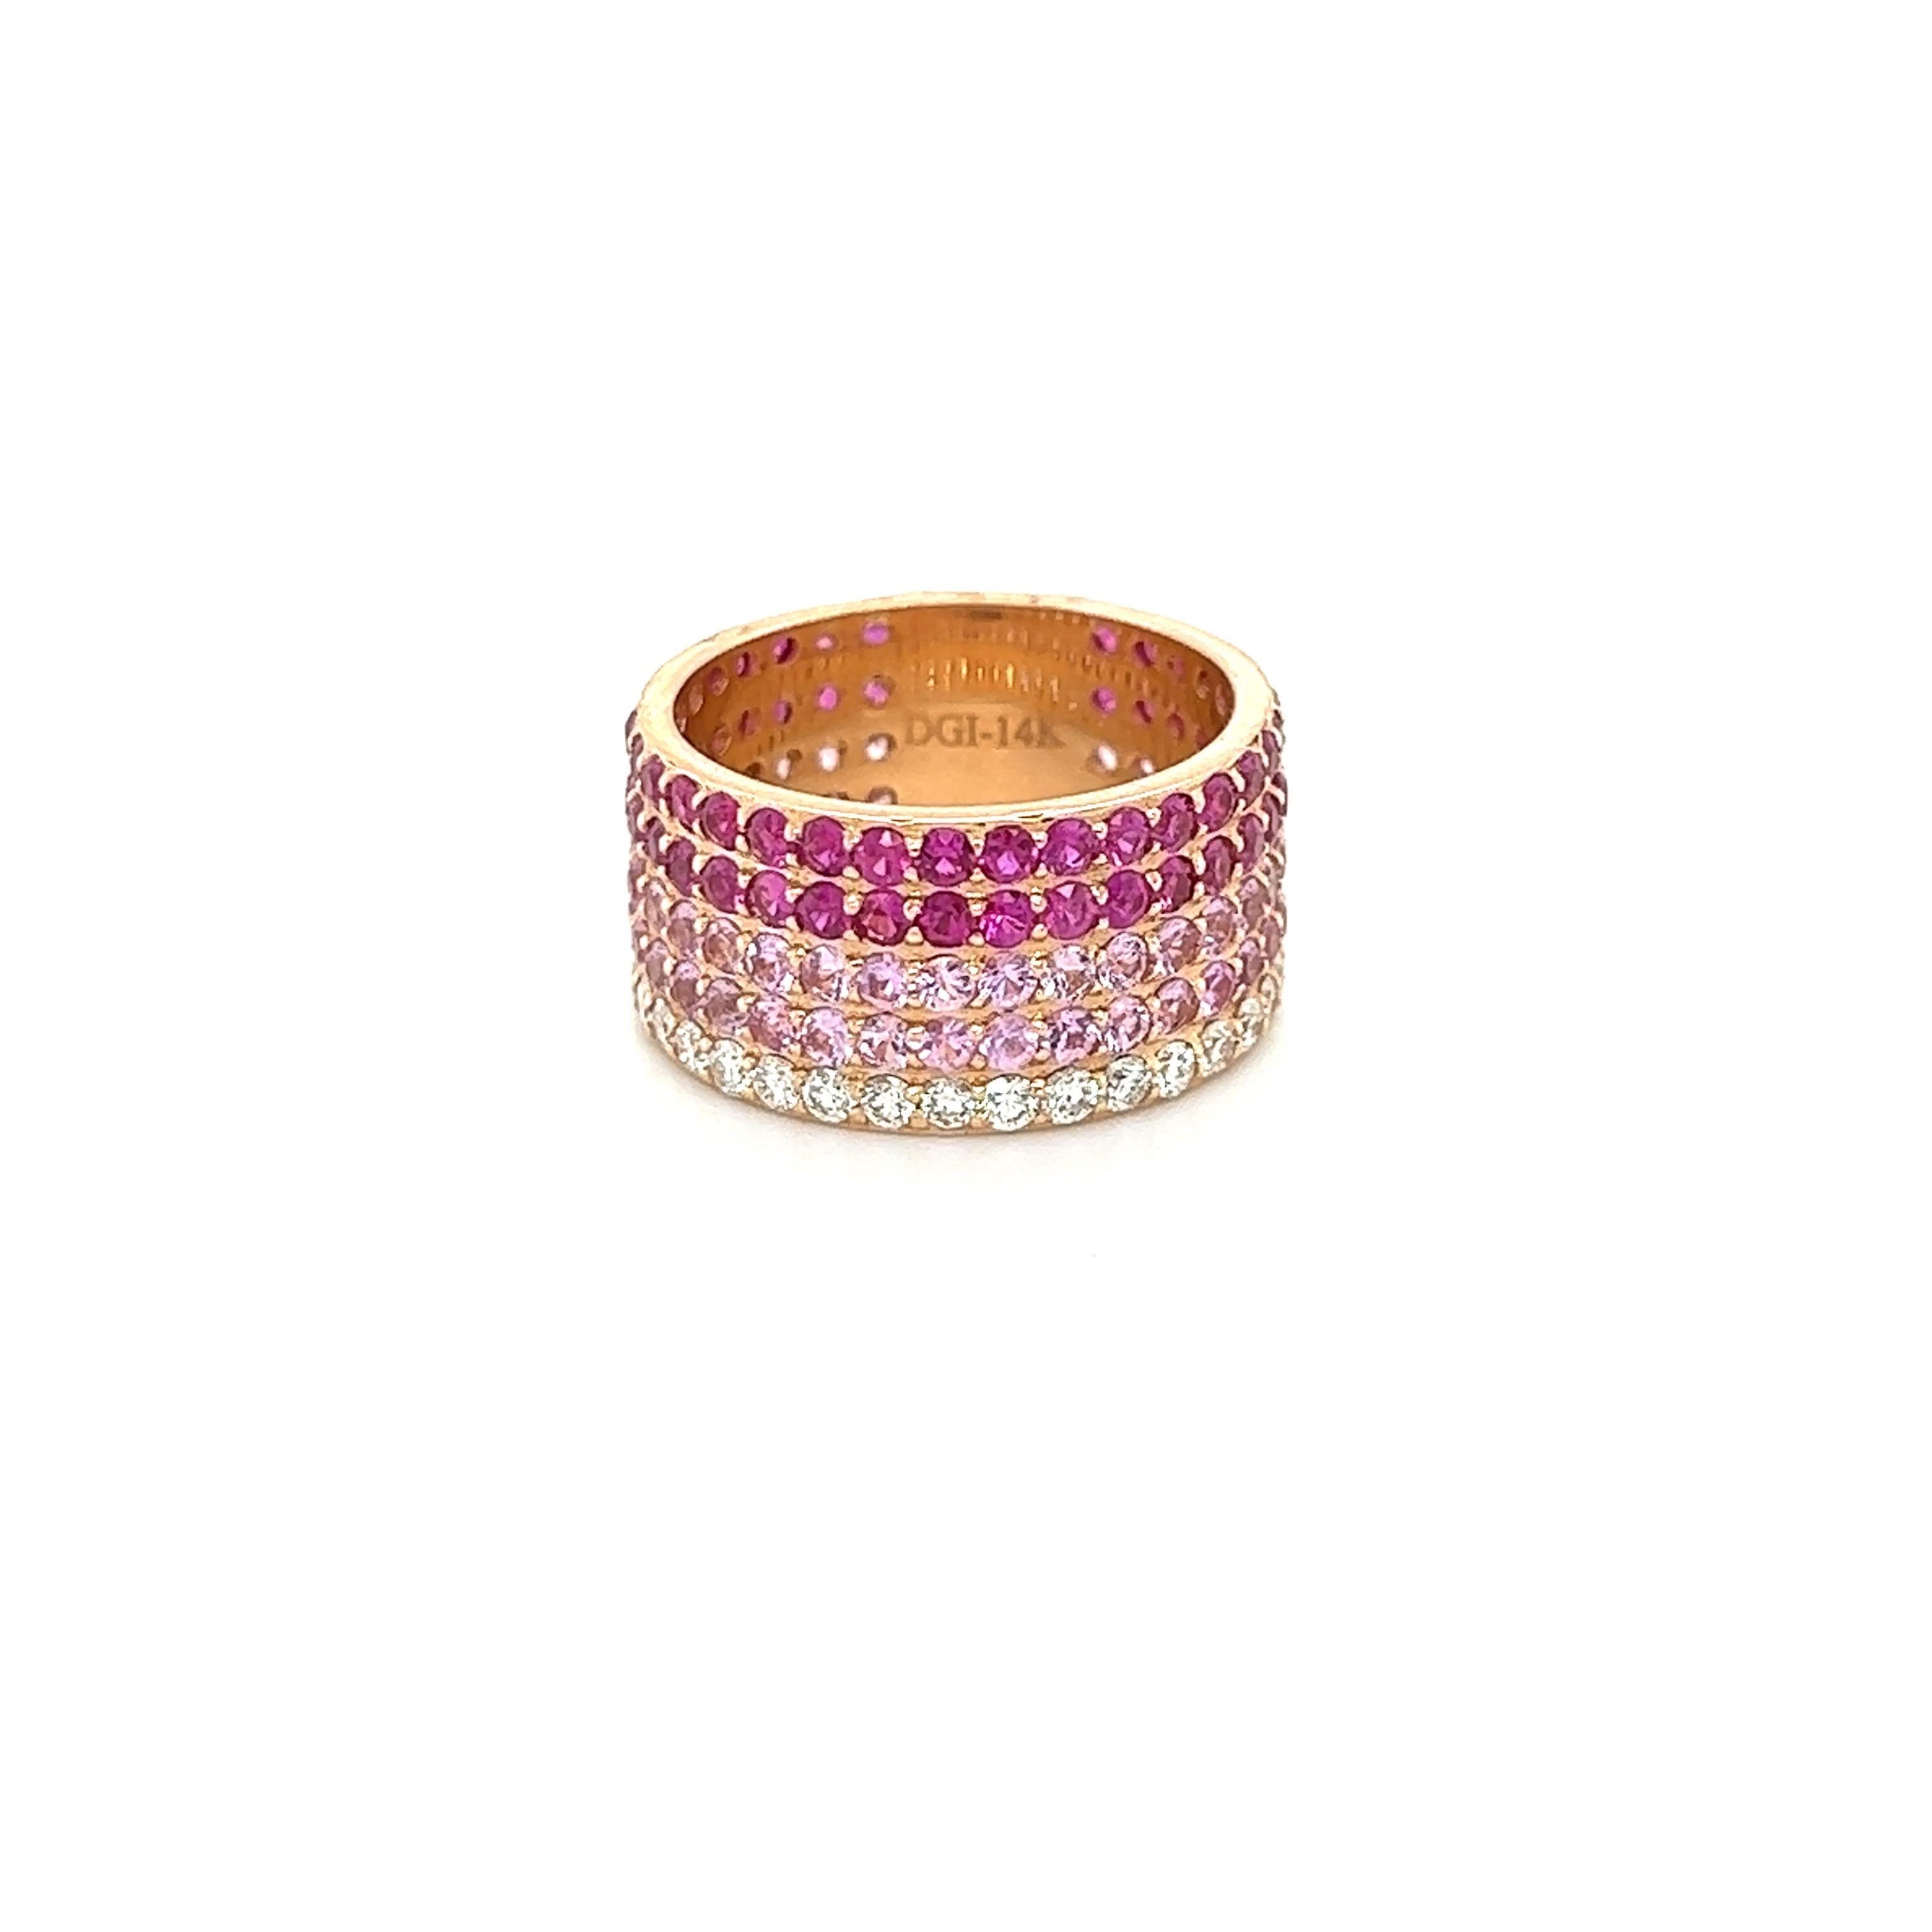 This ring has Natural Pink Sapphires weighing 3.80 carats and Natural Round Cut White Diamonds weighing 0.75 carats. The total carat weight of the ring is 4.55 carats. 

Clarity and Color of Diamonds are VS-H. The Pink Sapphires range from light to